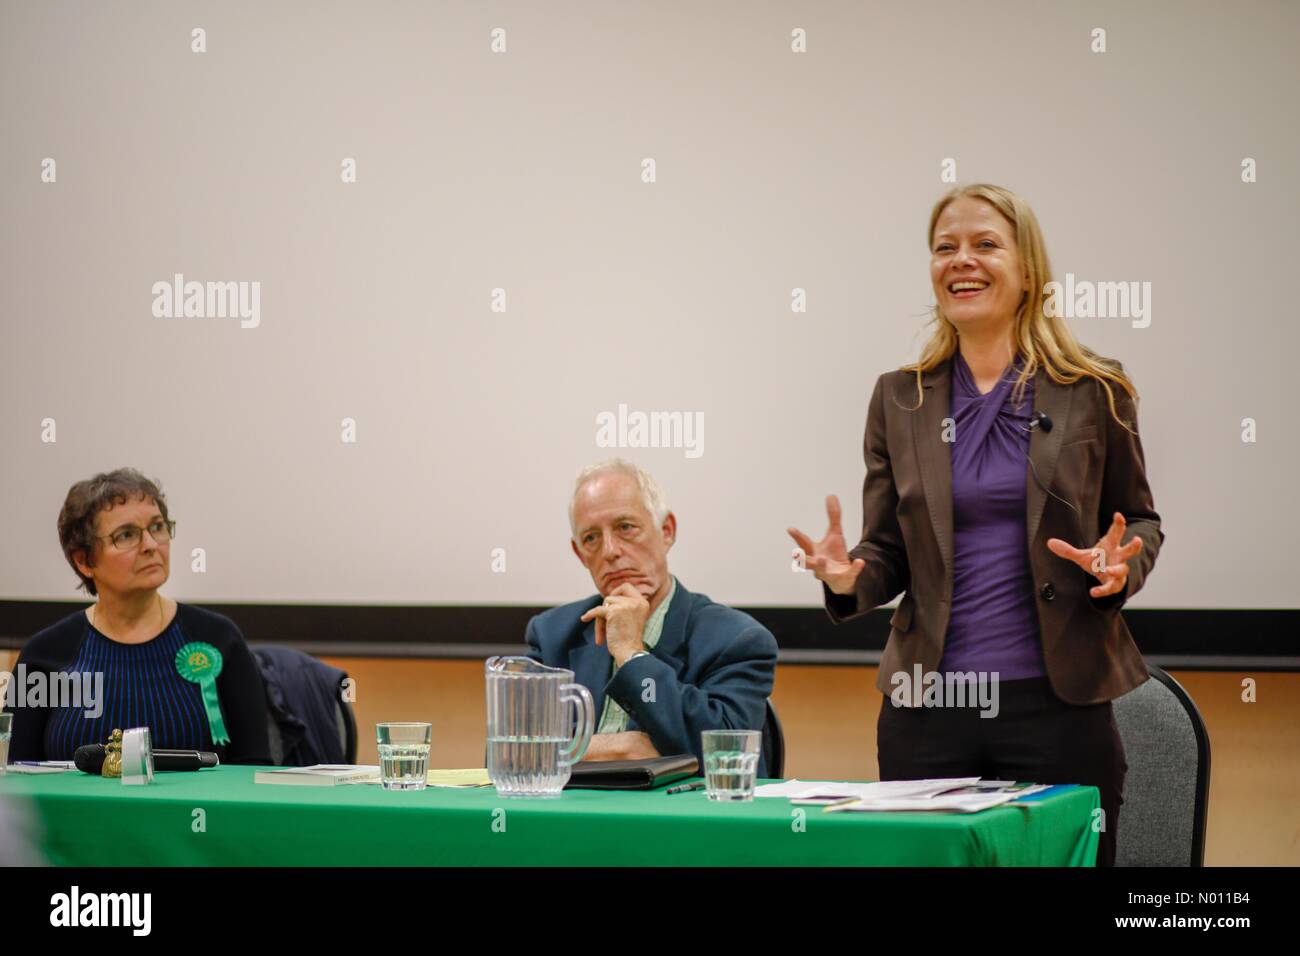 Godalming, Surrey, UK. 23rd April, 2019. UK local elections, Wilfred Noyce Centre, Godalming, Surrey. 23rd April 2019. Green Party co-leader Sian Berry and candidate Steve Williams at the Green Party conference in Godalming. Credit: jamesjagger/StockimoNews/Alamy Live News Stock Photo